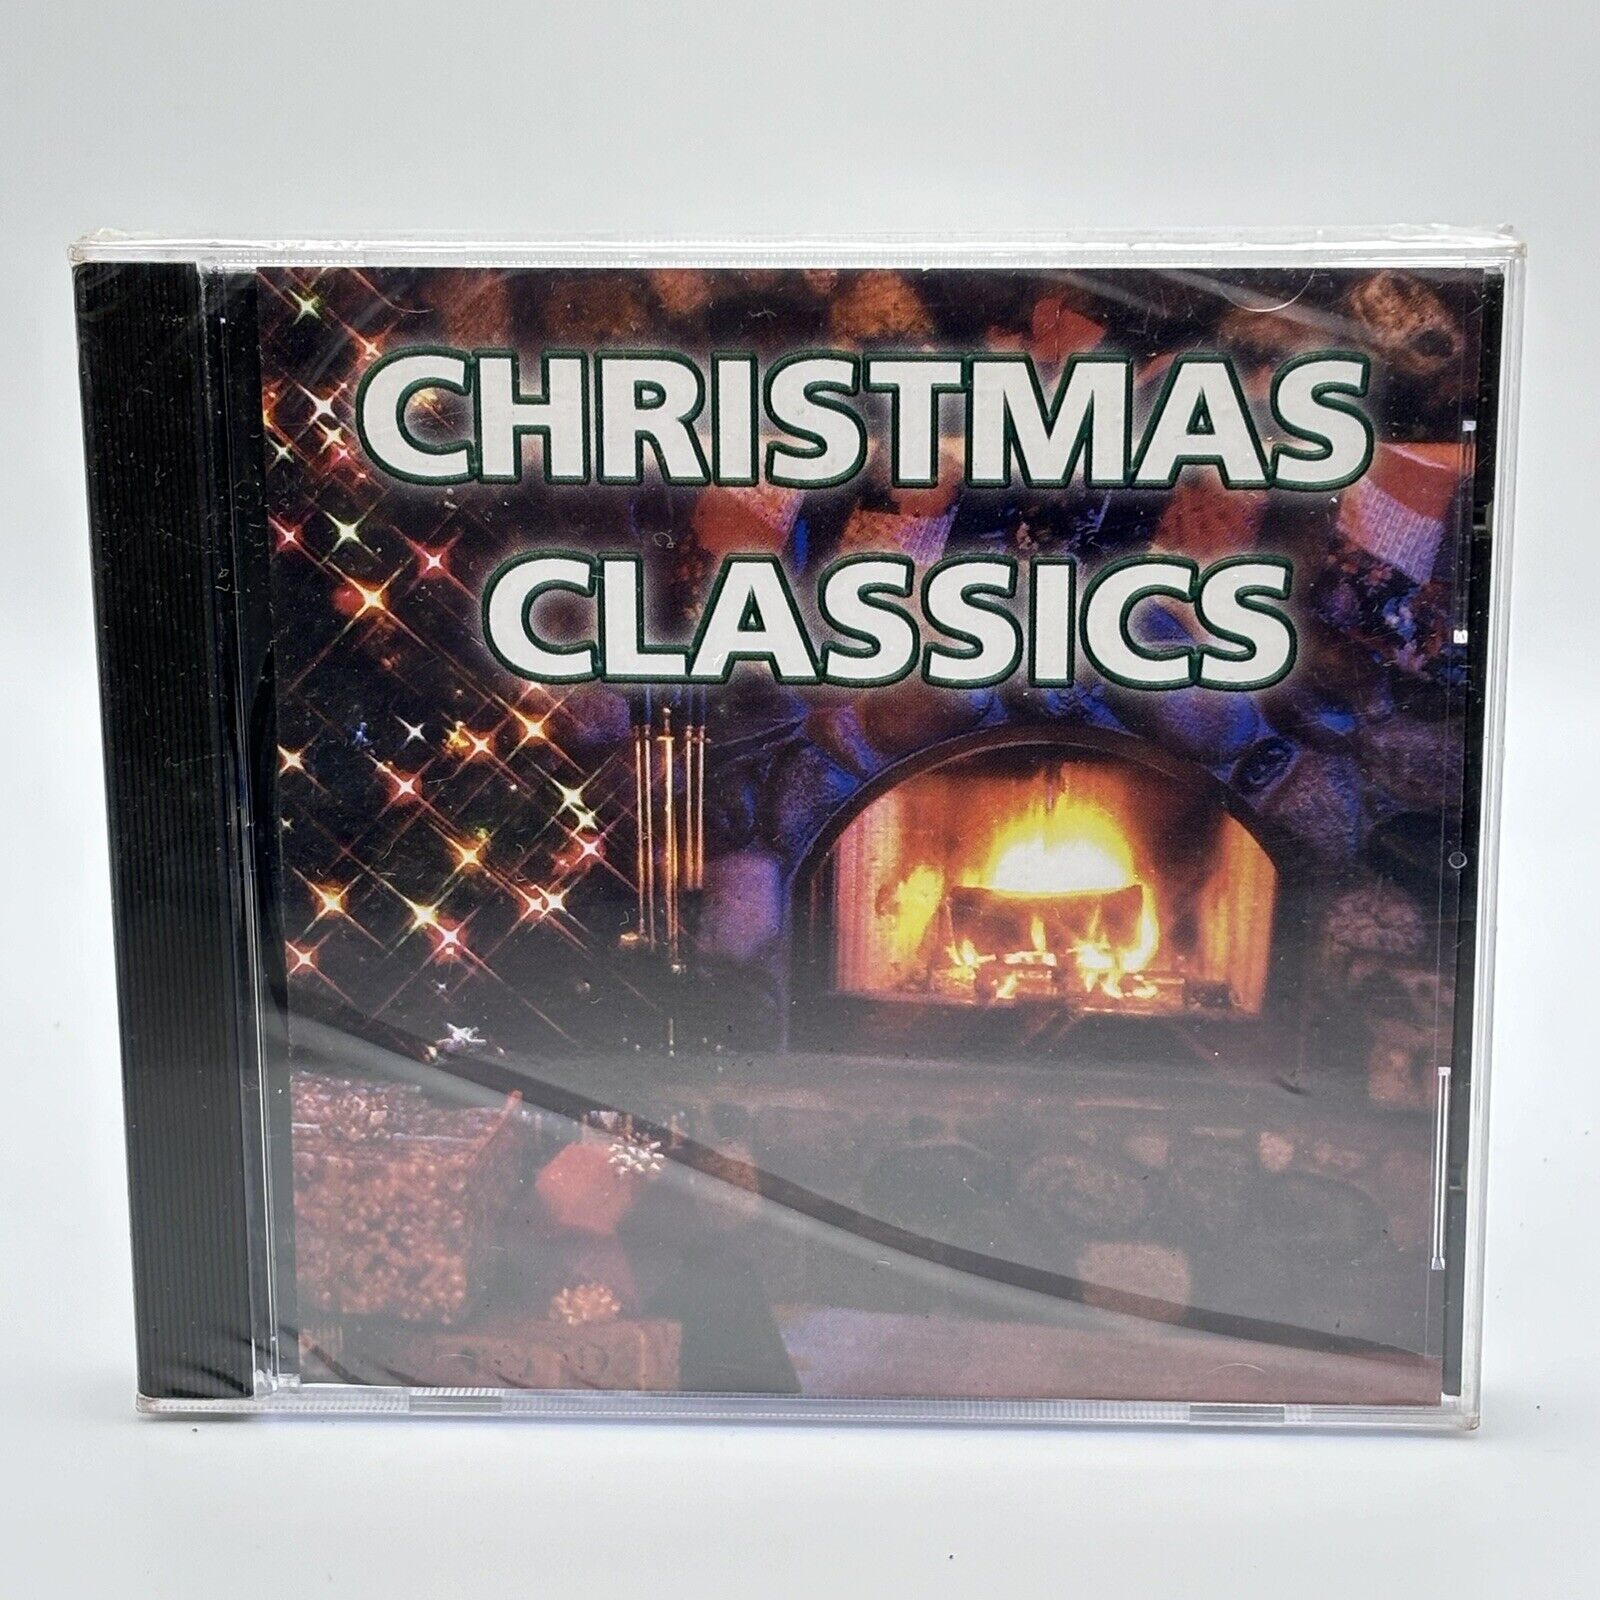 Christmas Classics by Various Artists (CD 1998 Sony Music)☆Free Shipping☆